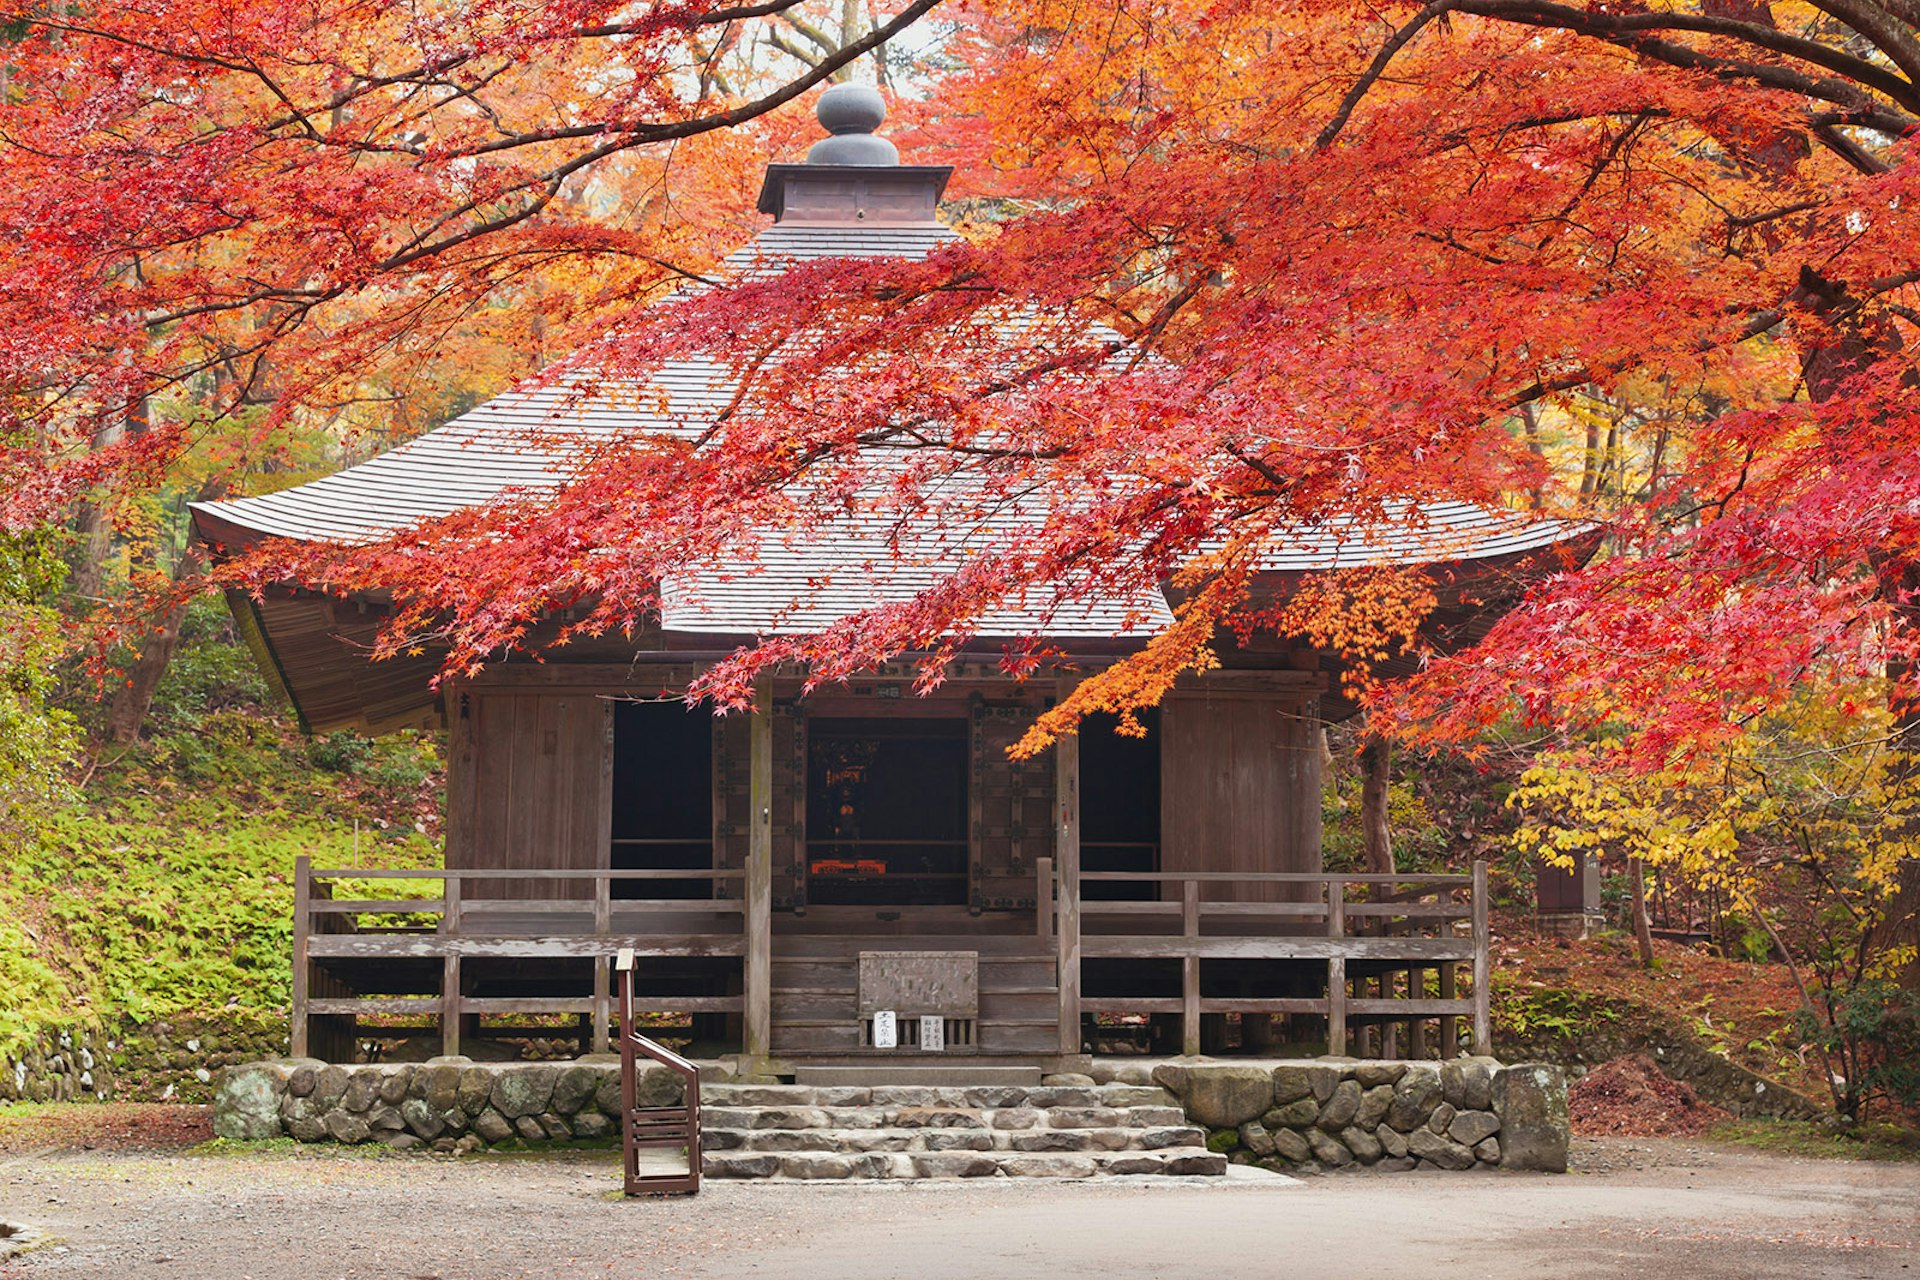 A wooden temple building surrounded by bright red foliage.